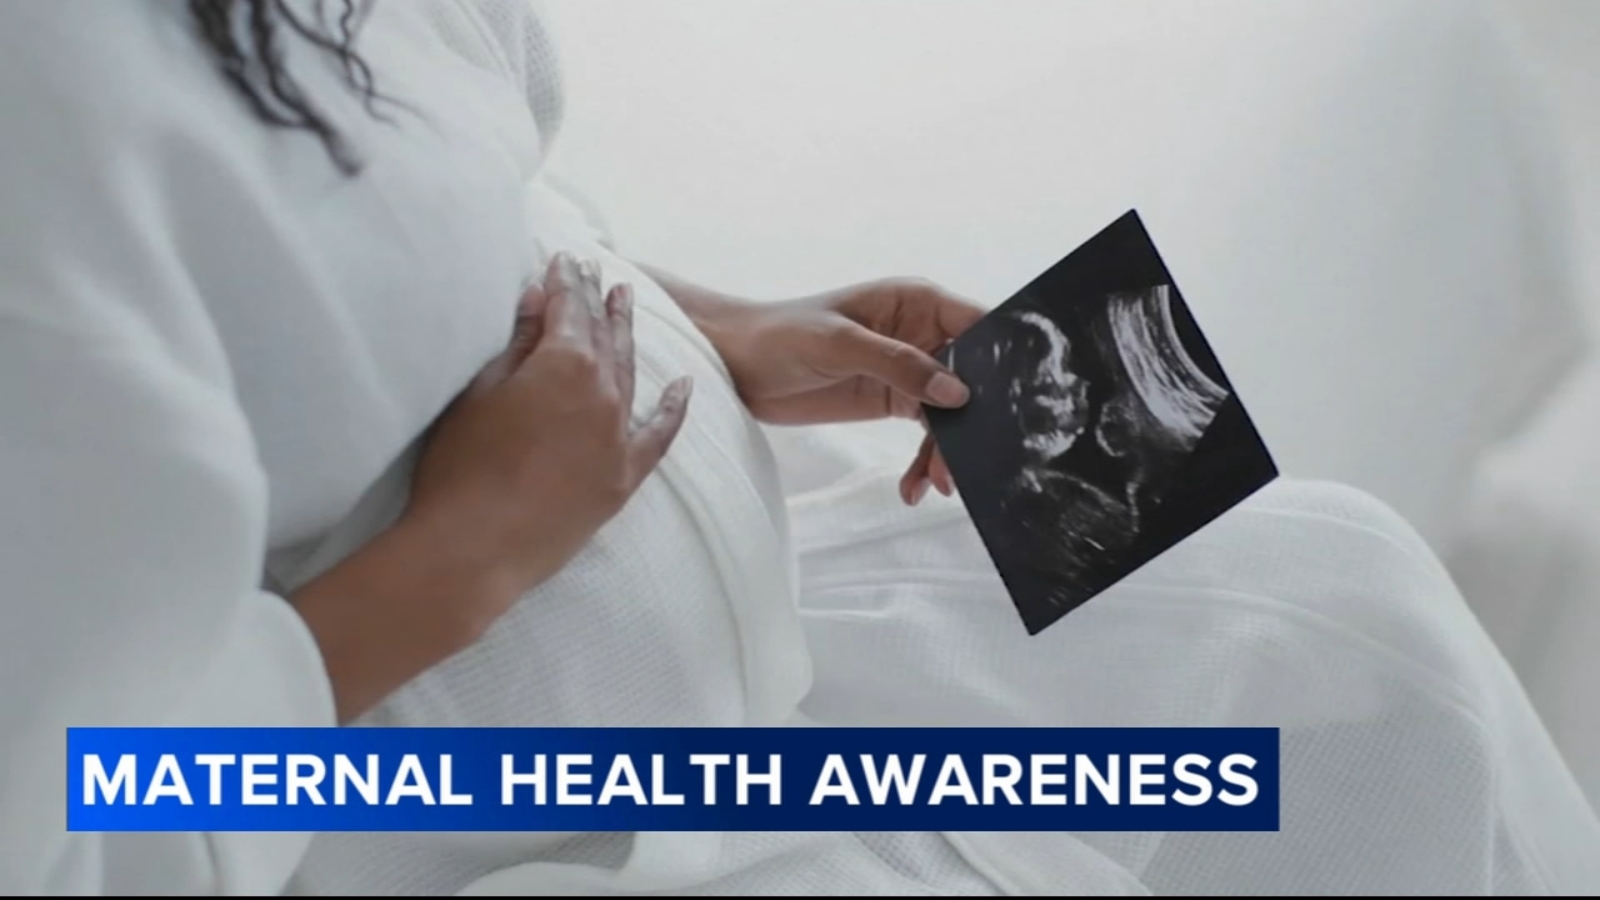 Camden County, New Jersey among areas working to improve maternal health services [Video]